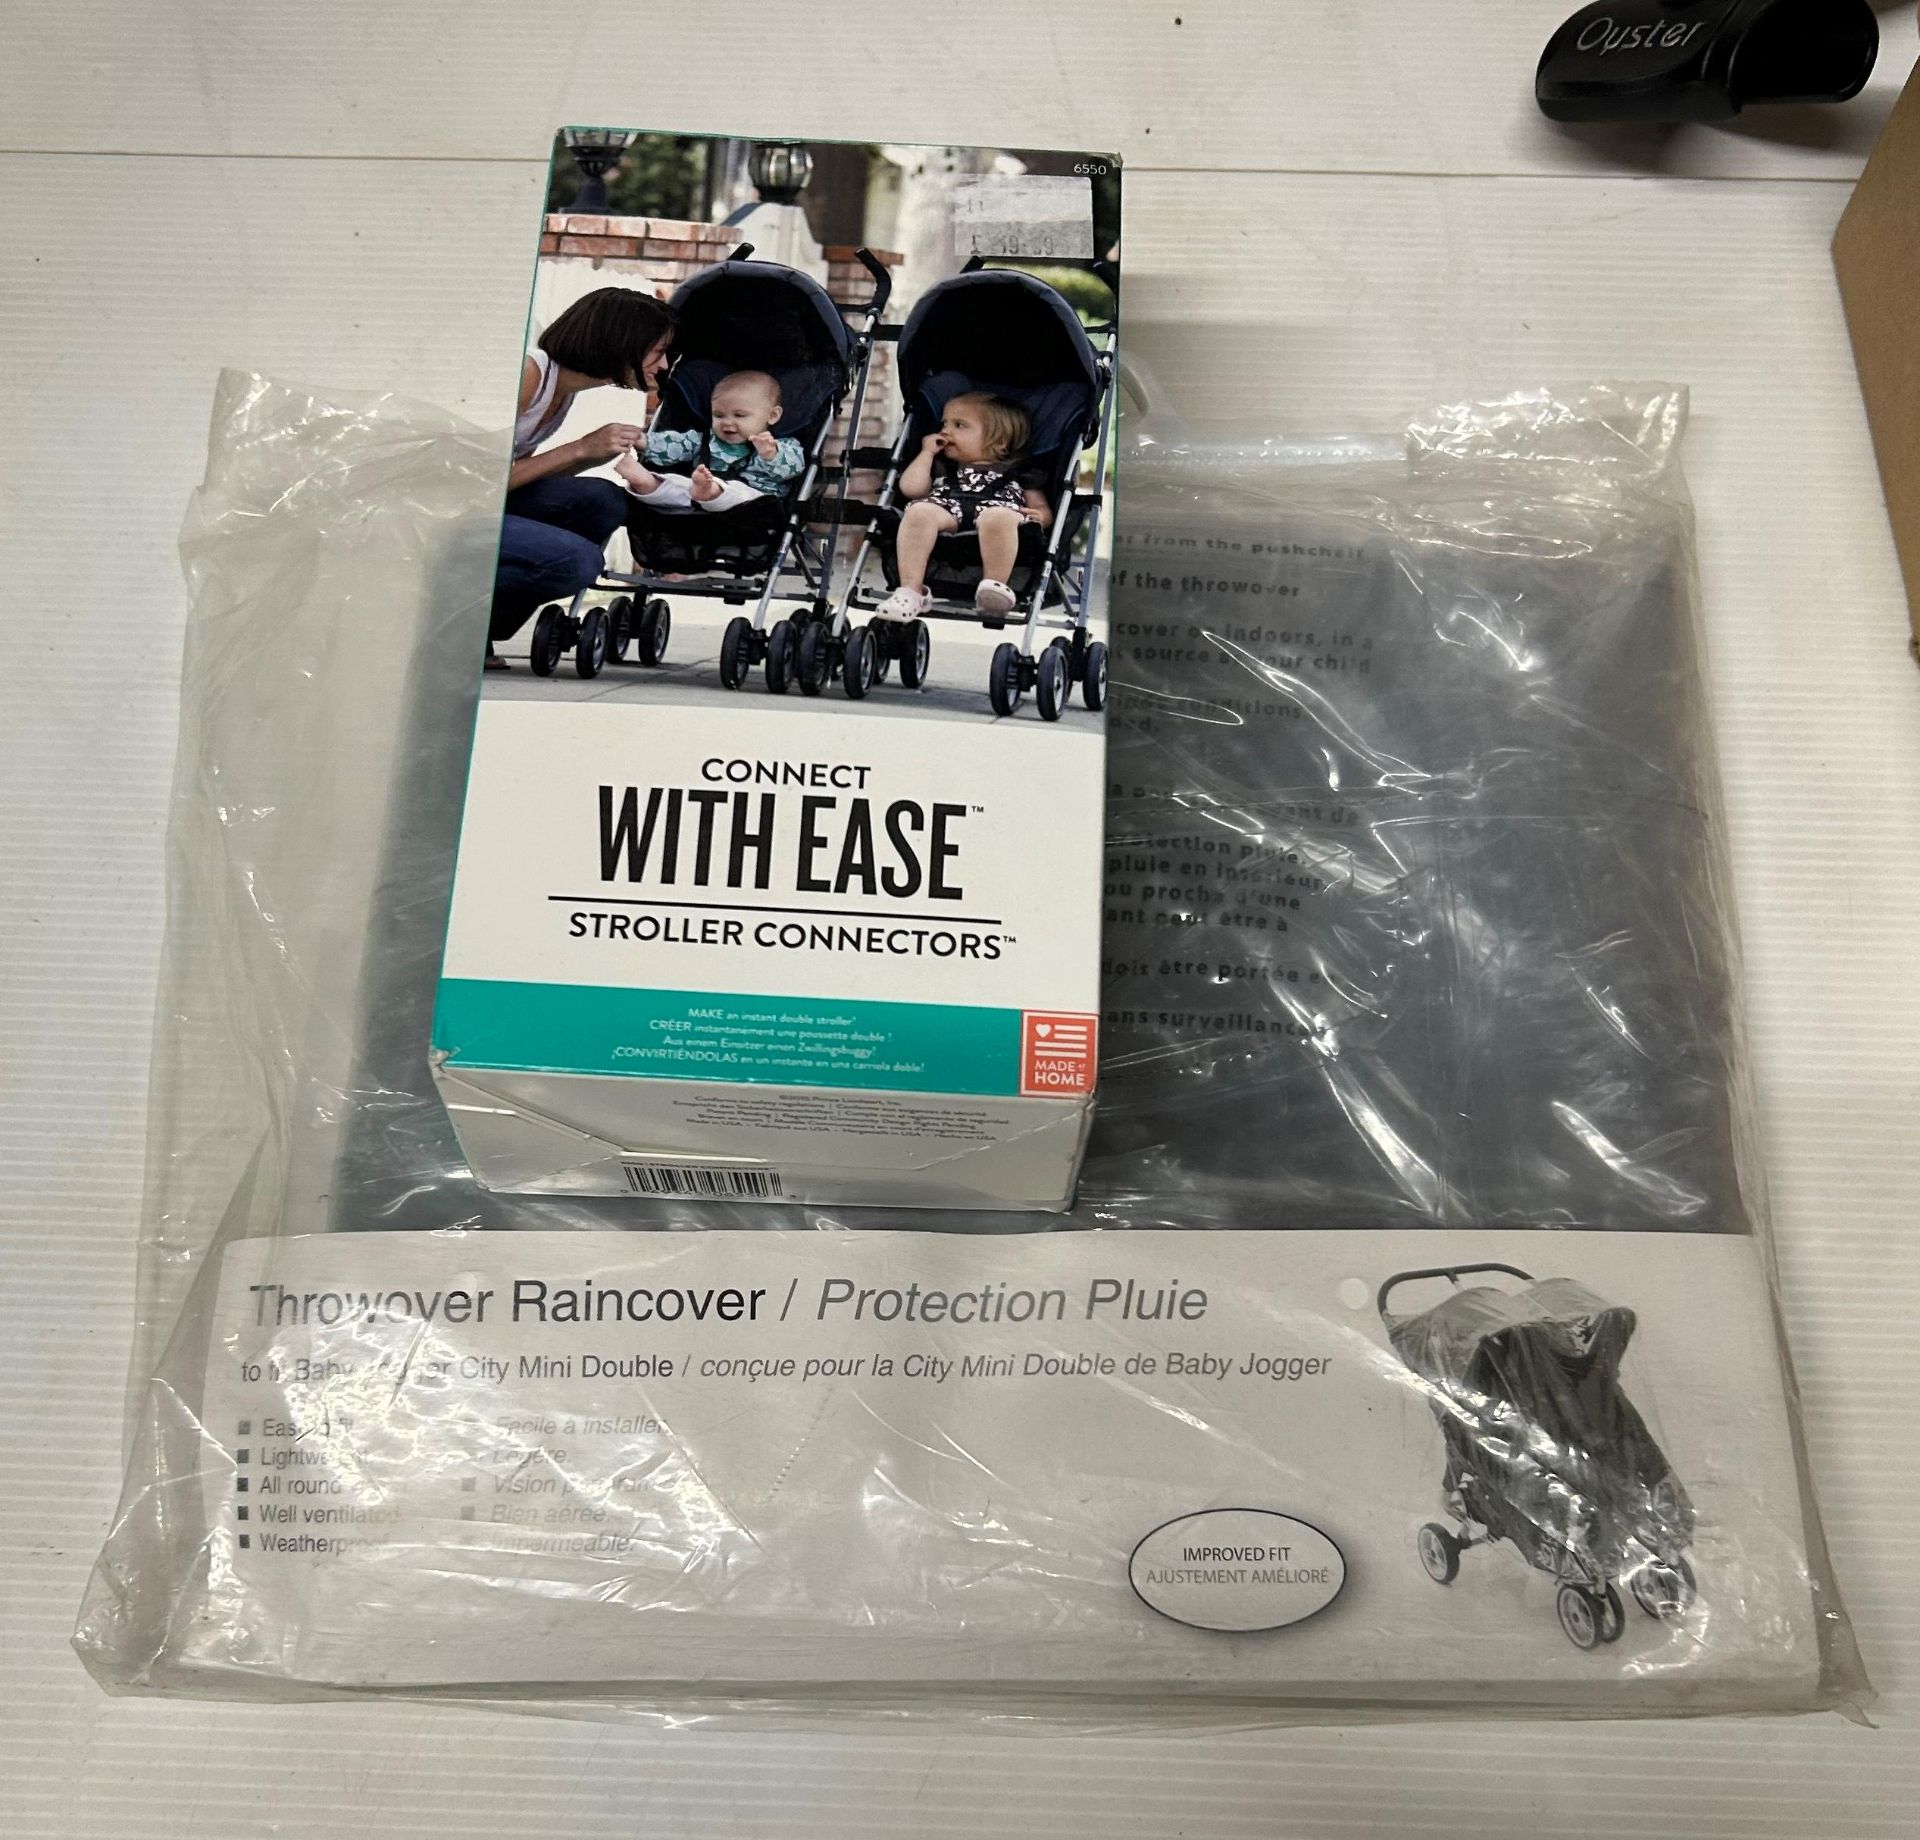 BNIB CONNECT WITH EASE STROLLER CONNECTORS FOR PUSHING TWO STROLLERS AT ONCE AND BRAND NEW PACKAGED